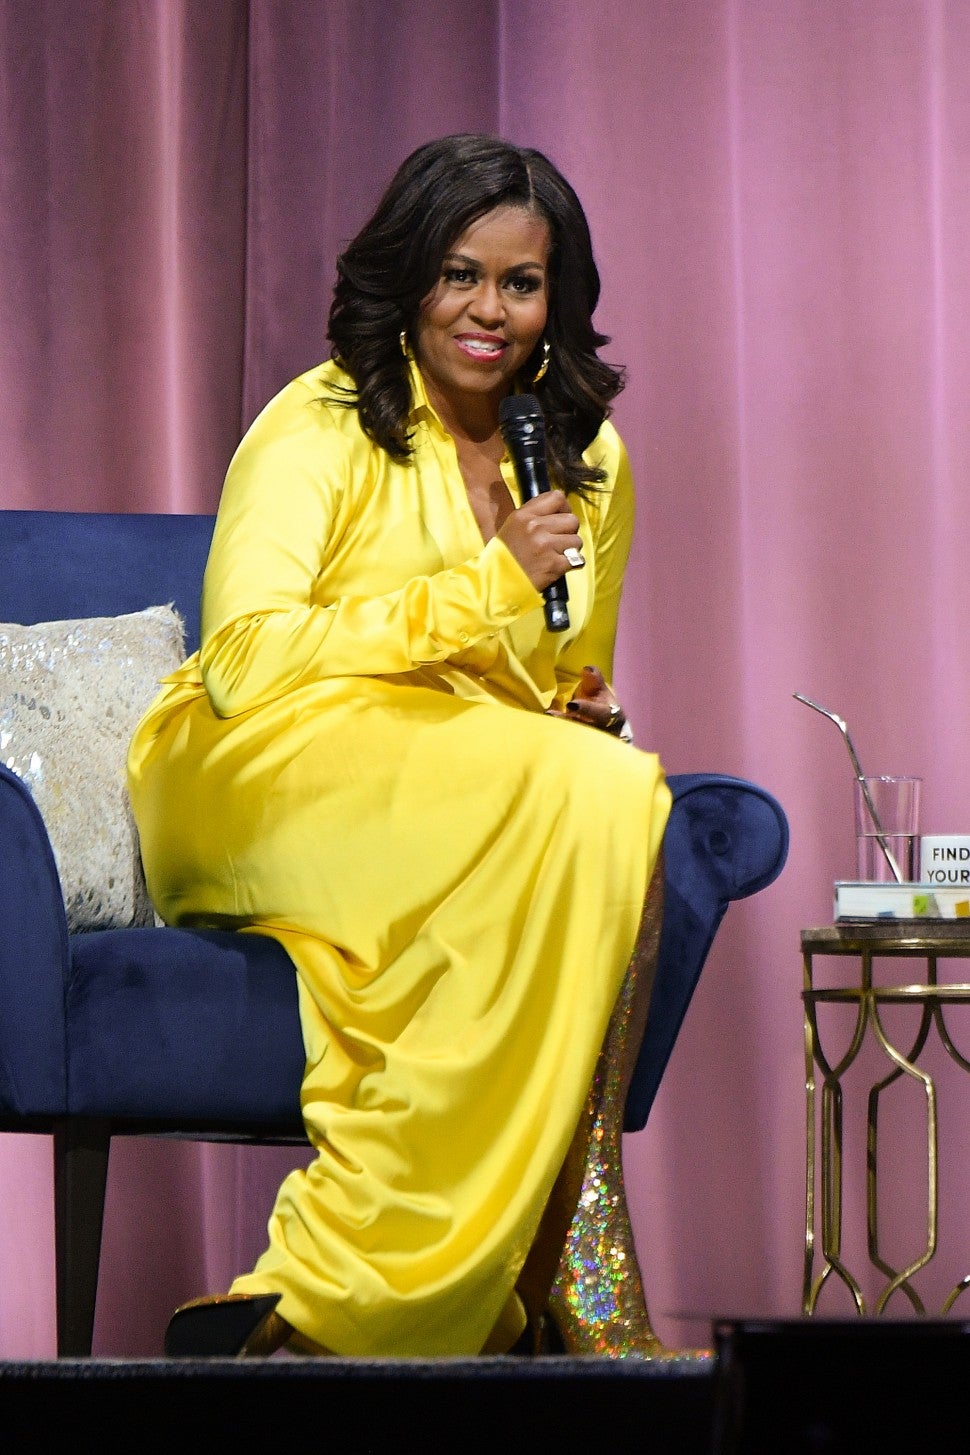 Michelle Obama in yellow dress and glitter boots